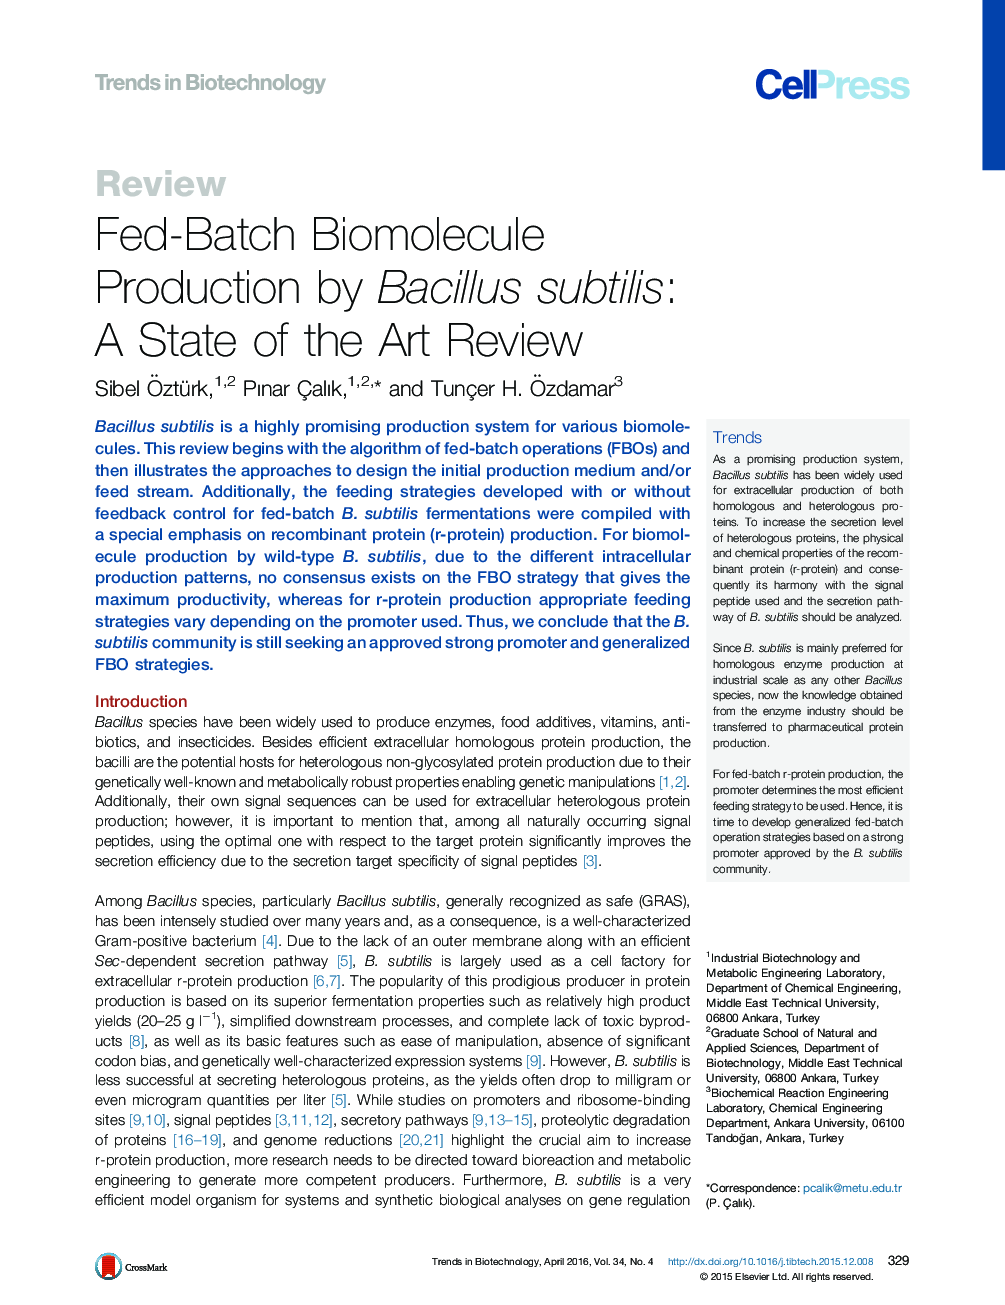 Fed-Batch Biomolecule Production by Bacillus subtilis: A State of the Art Review